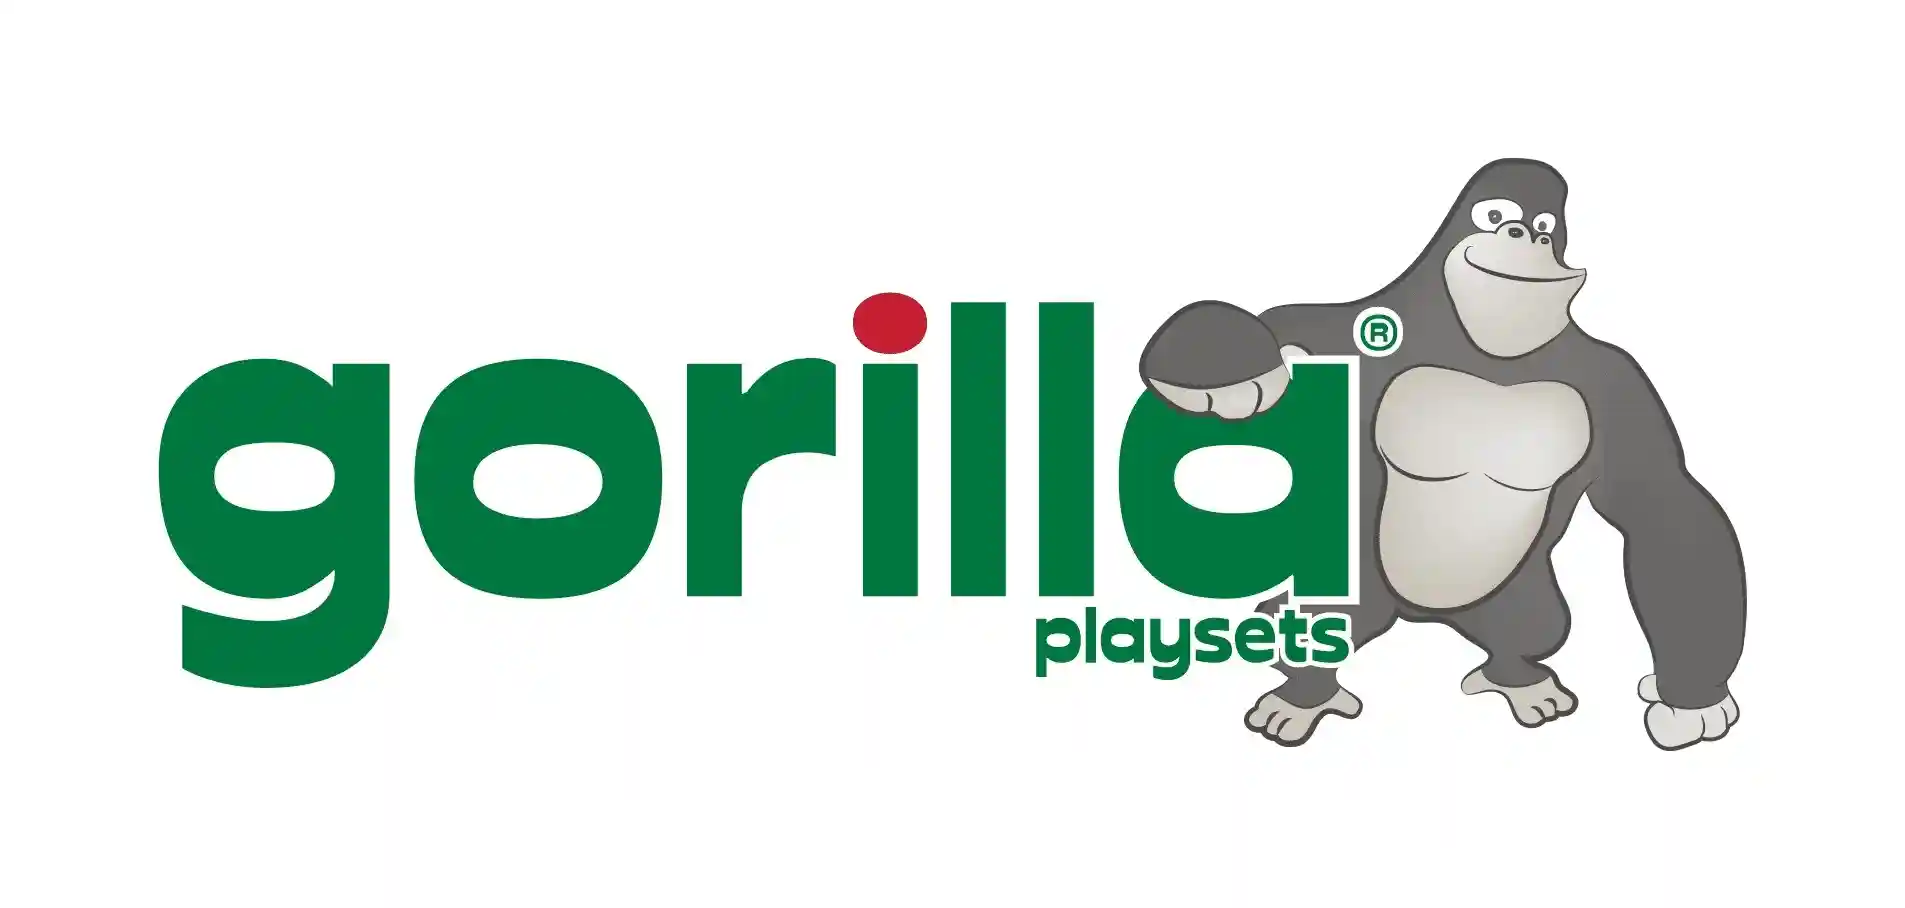 Save Up To 50% Discounts - Gorilla Playsets Special Offer With Entire Itemss